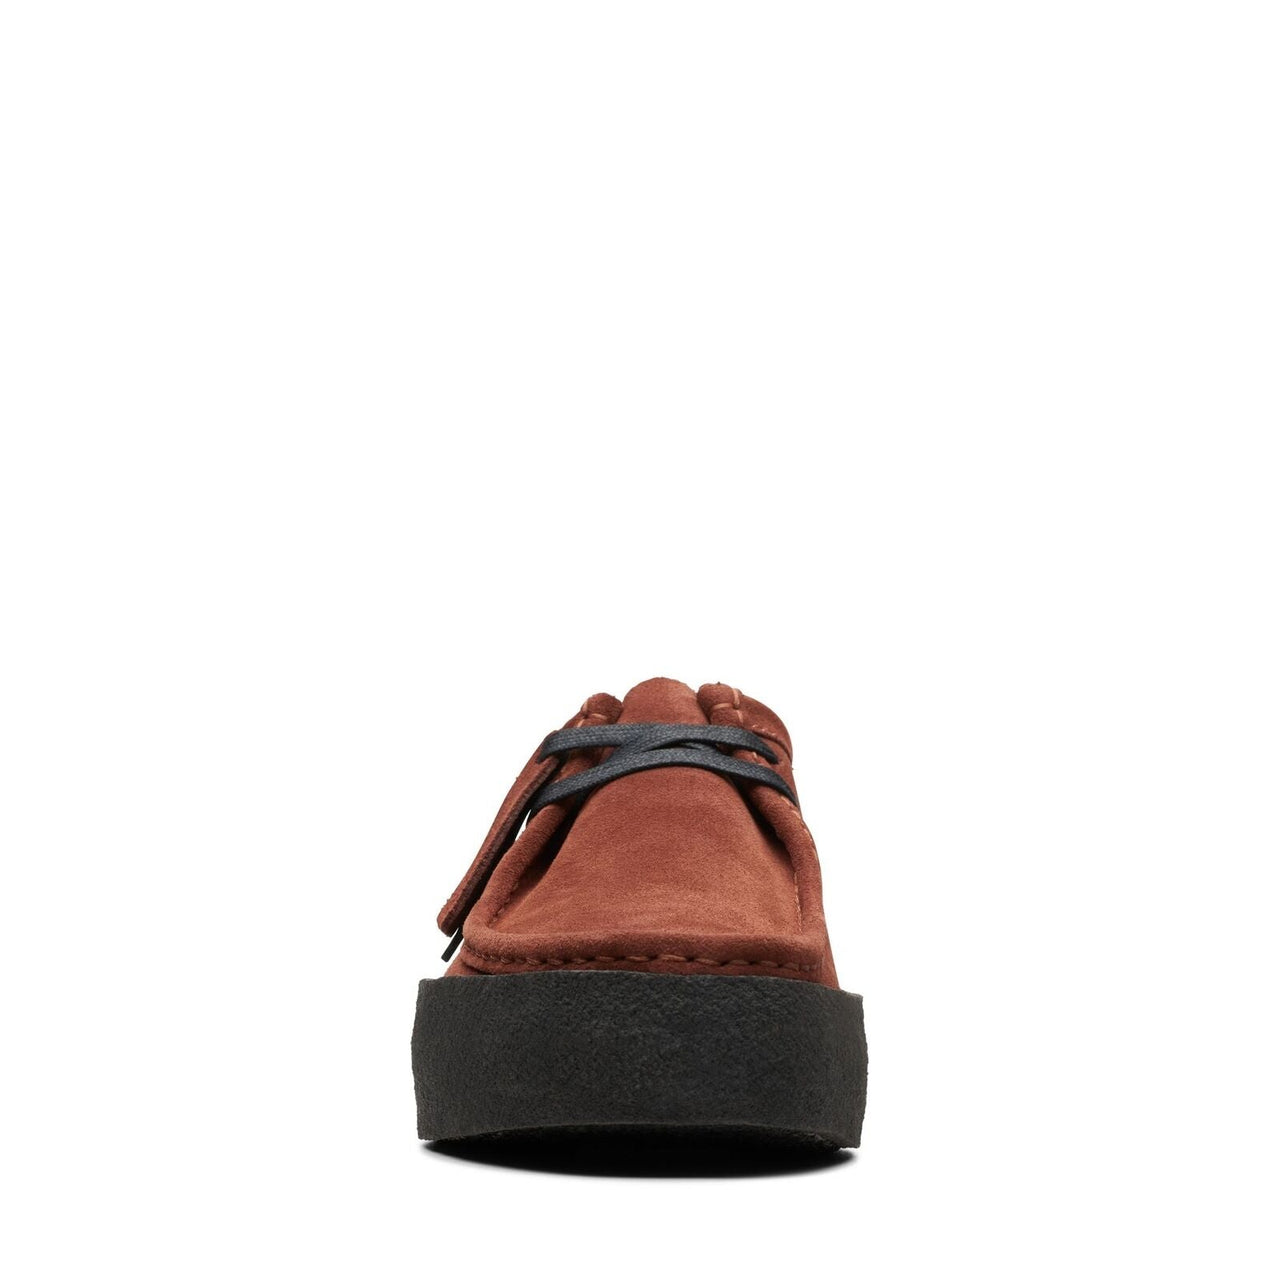  Stylish and comfortable Clarks Women's Wallabee Cup Rust Suede 26173658 shoe 